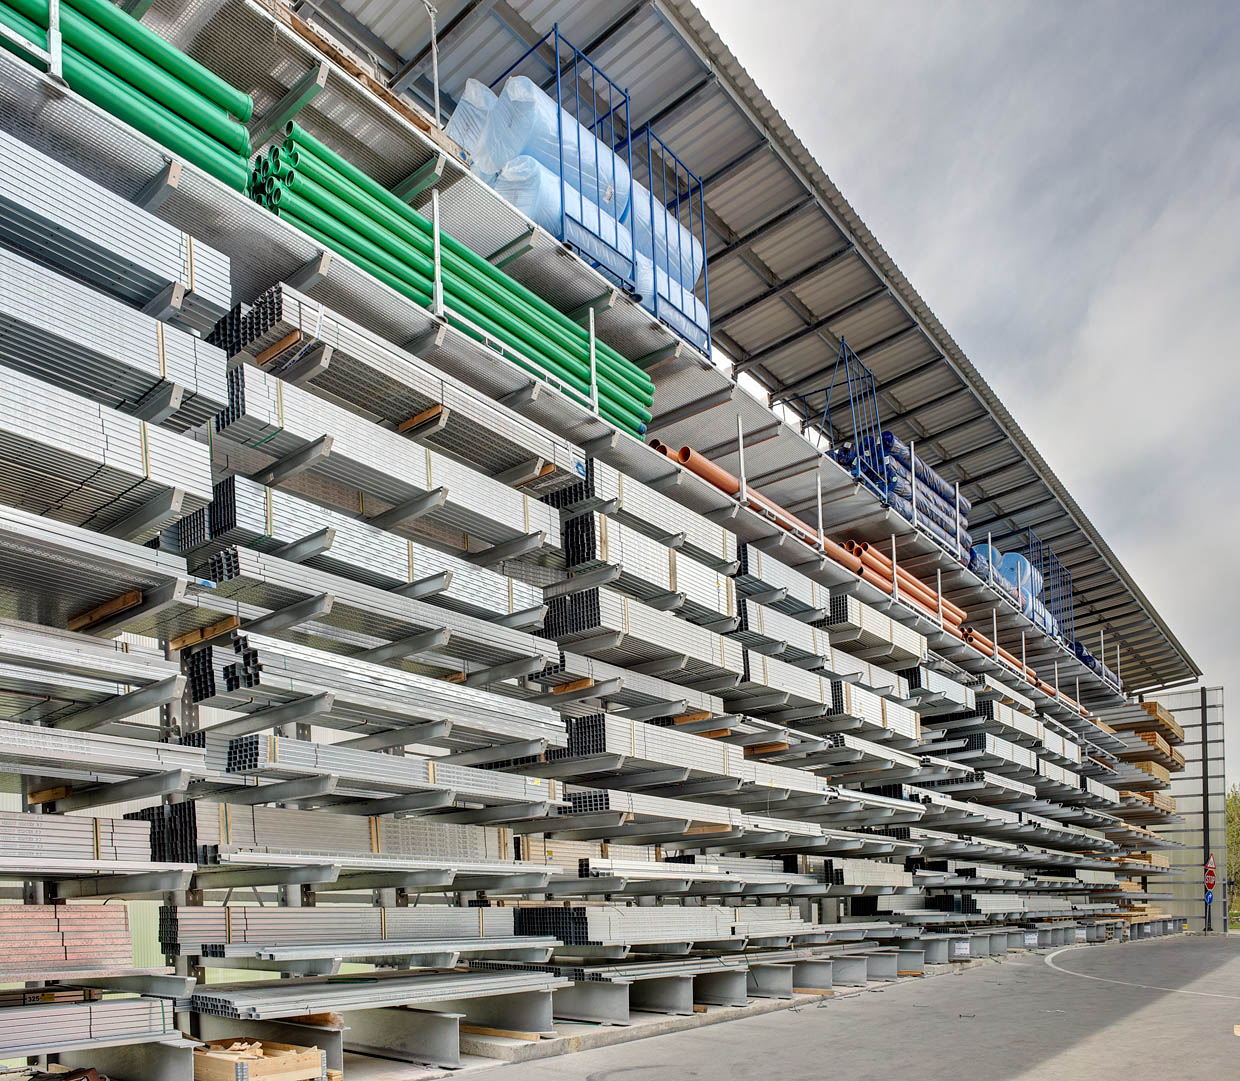 [Translate "Portugal"] Cantilever racking building material